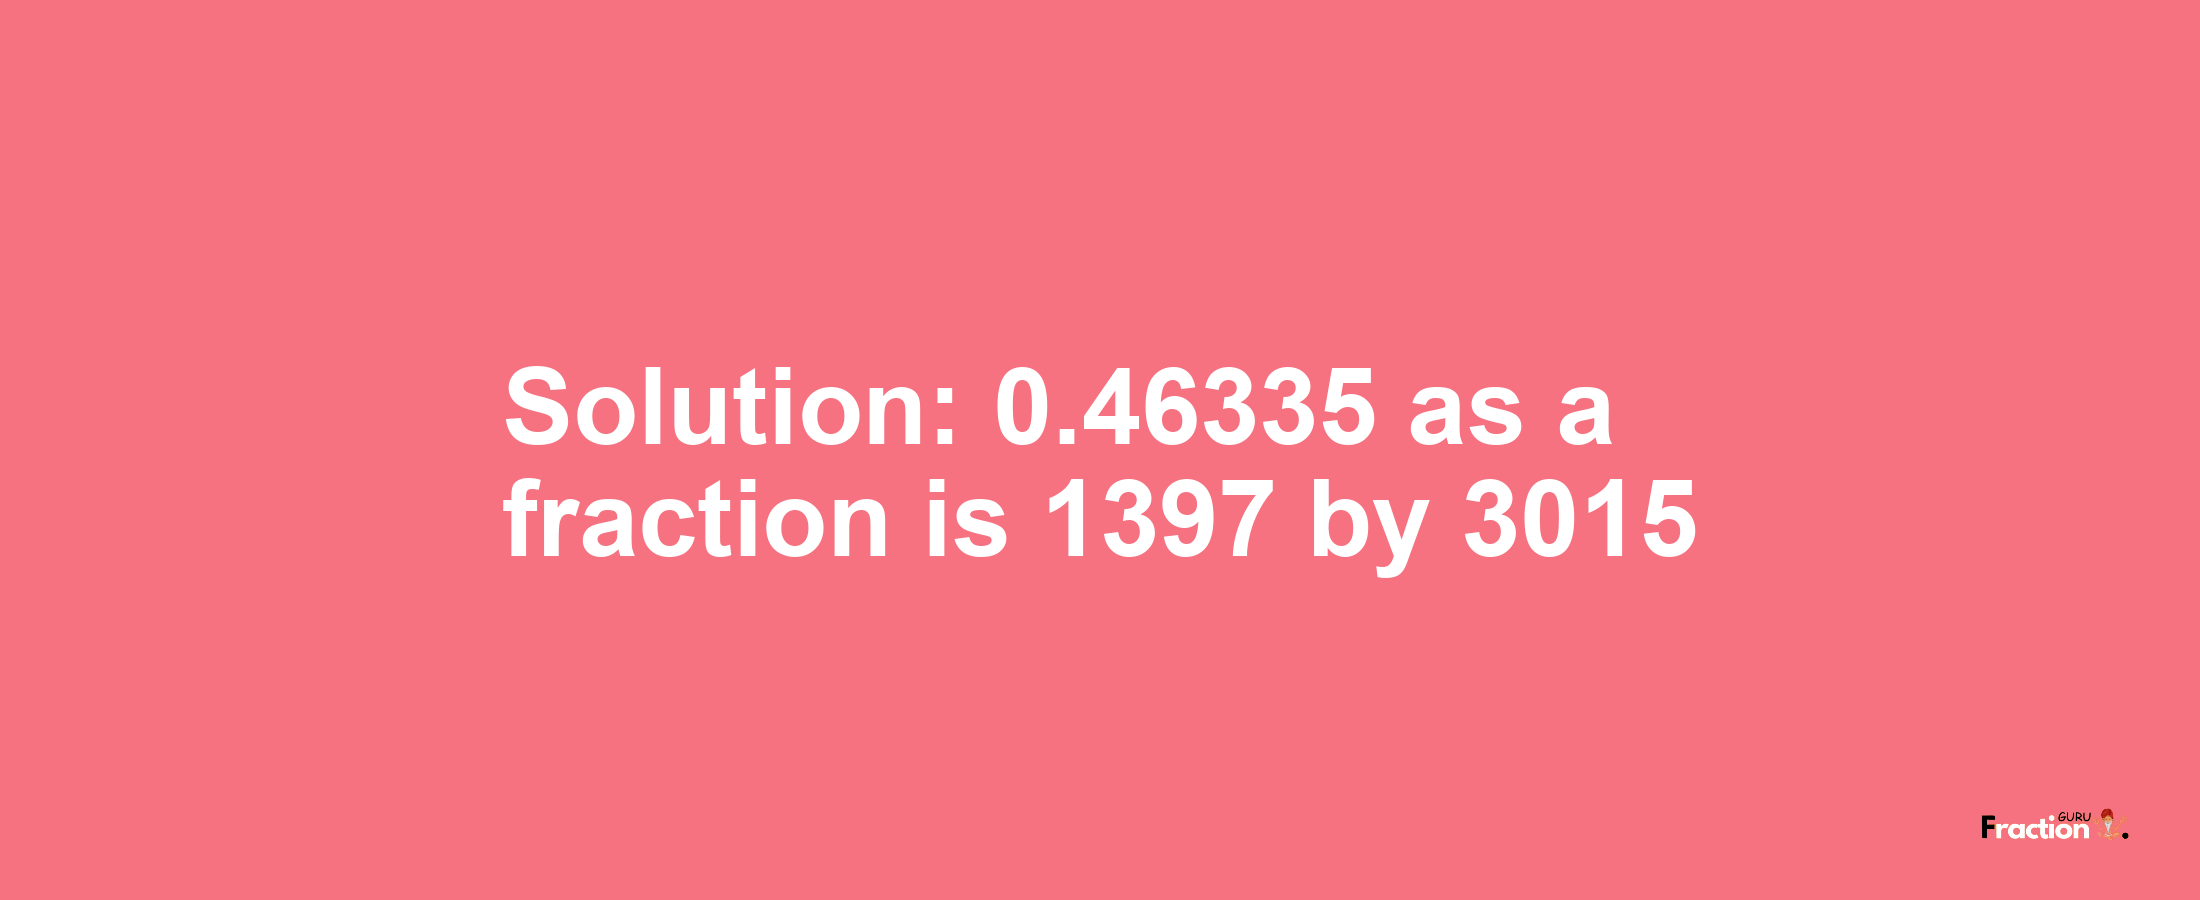 Solution:0.46335 as a fraction is 1397/3015